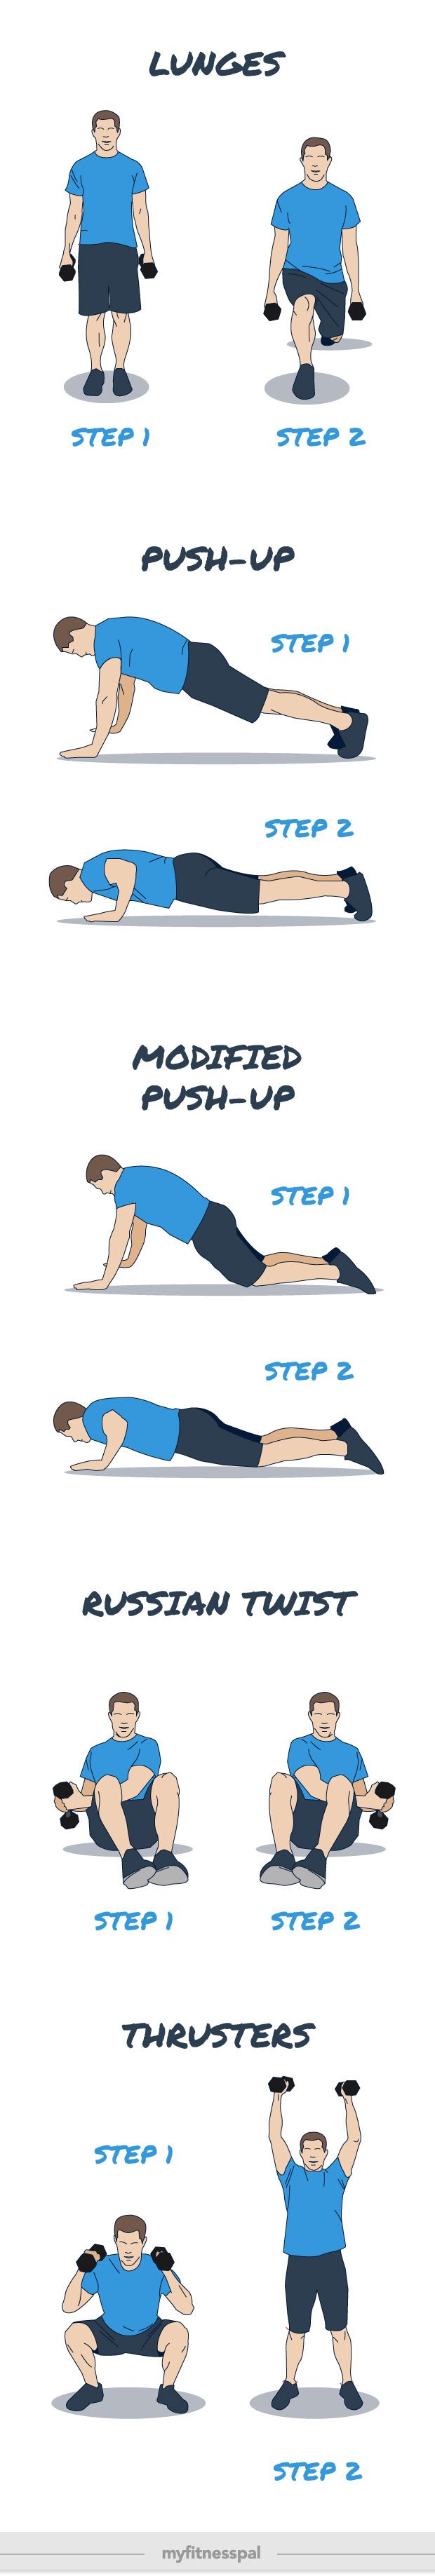 HIIT exercise illustrations